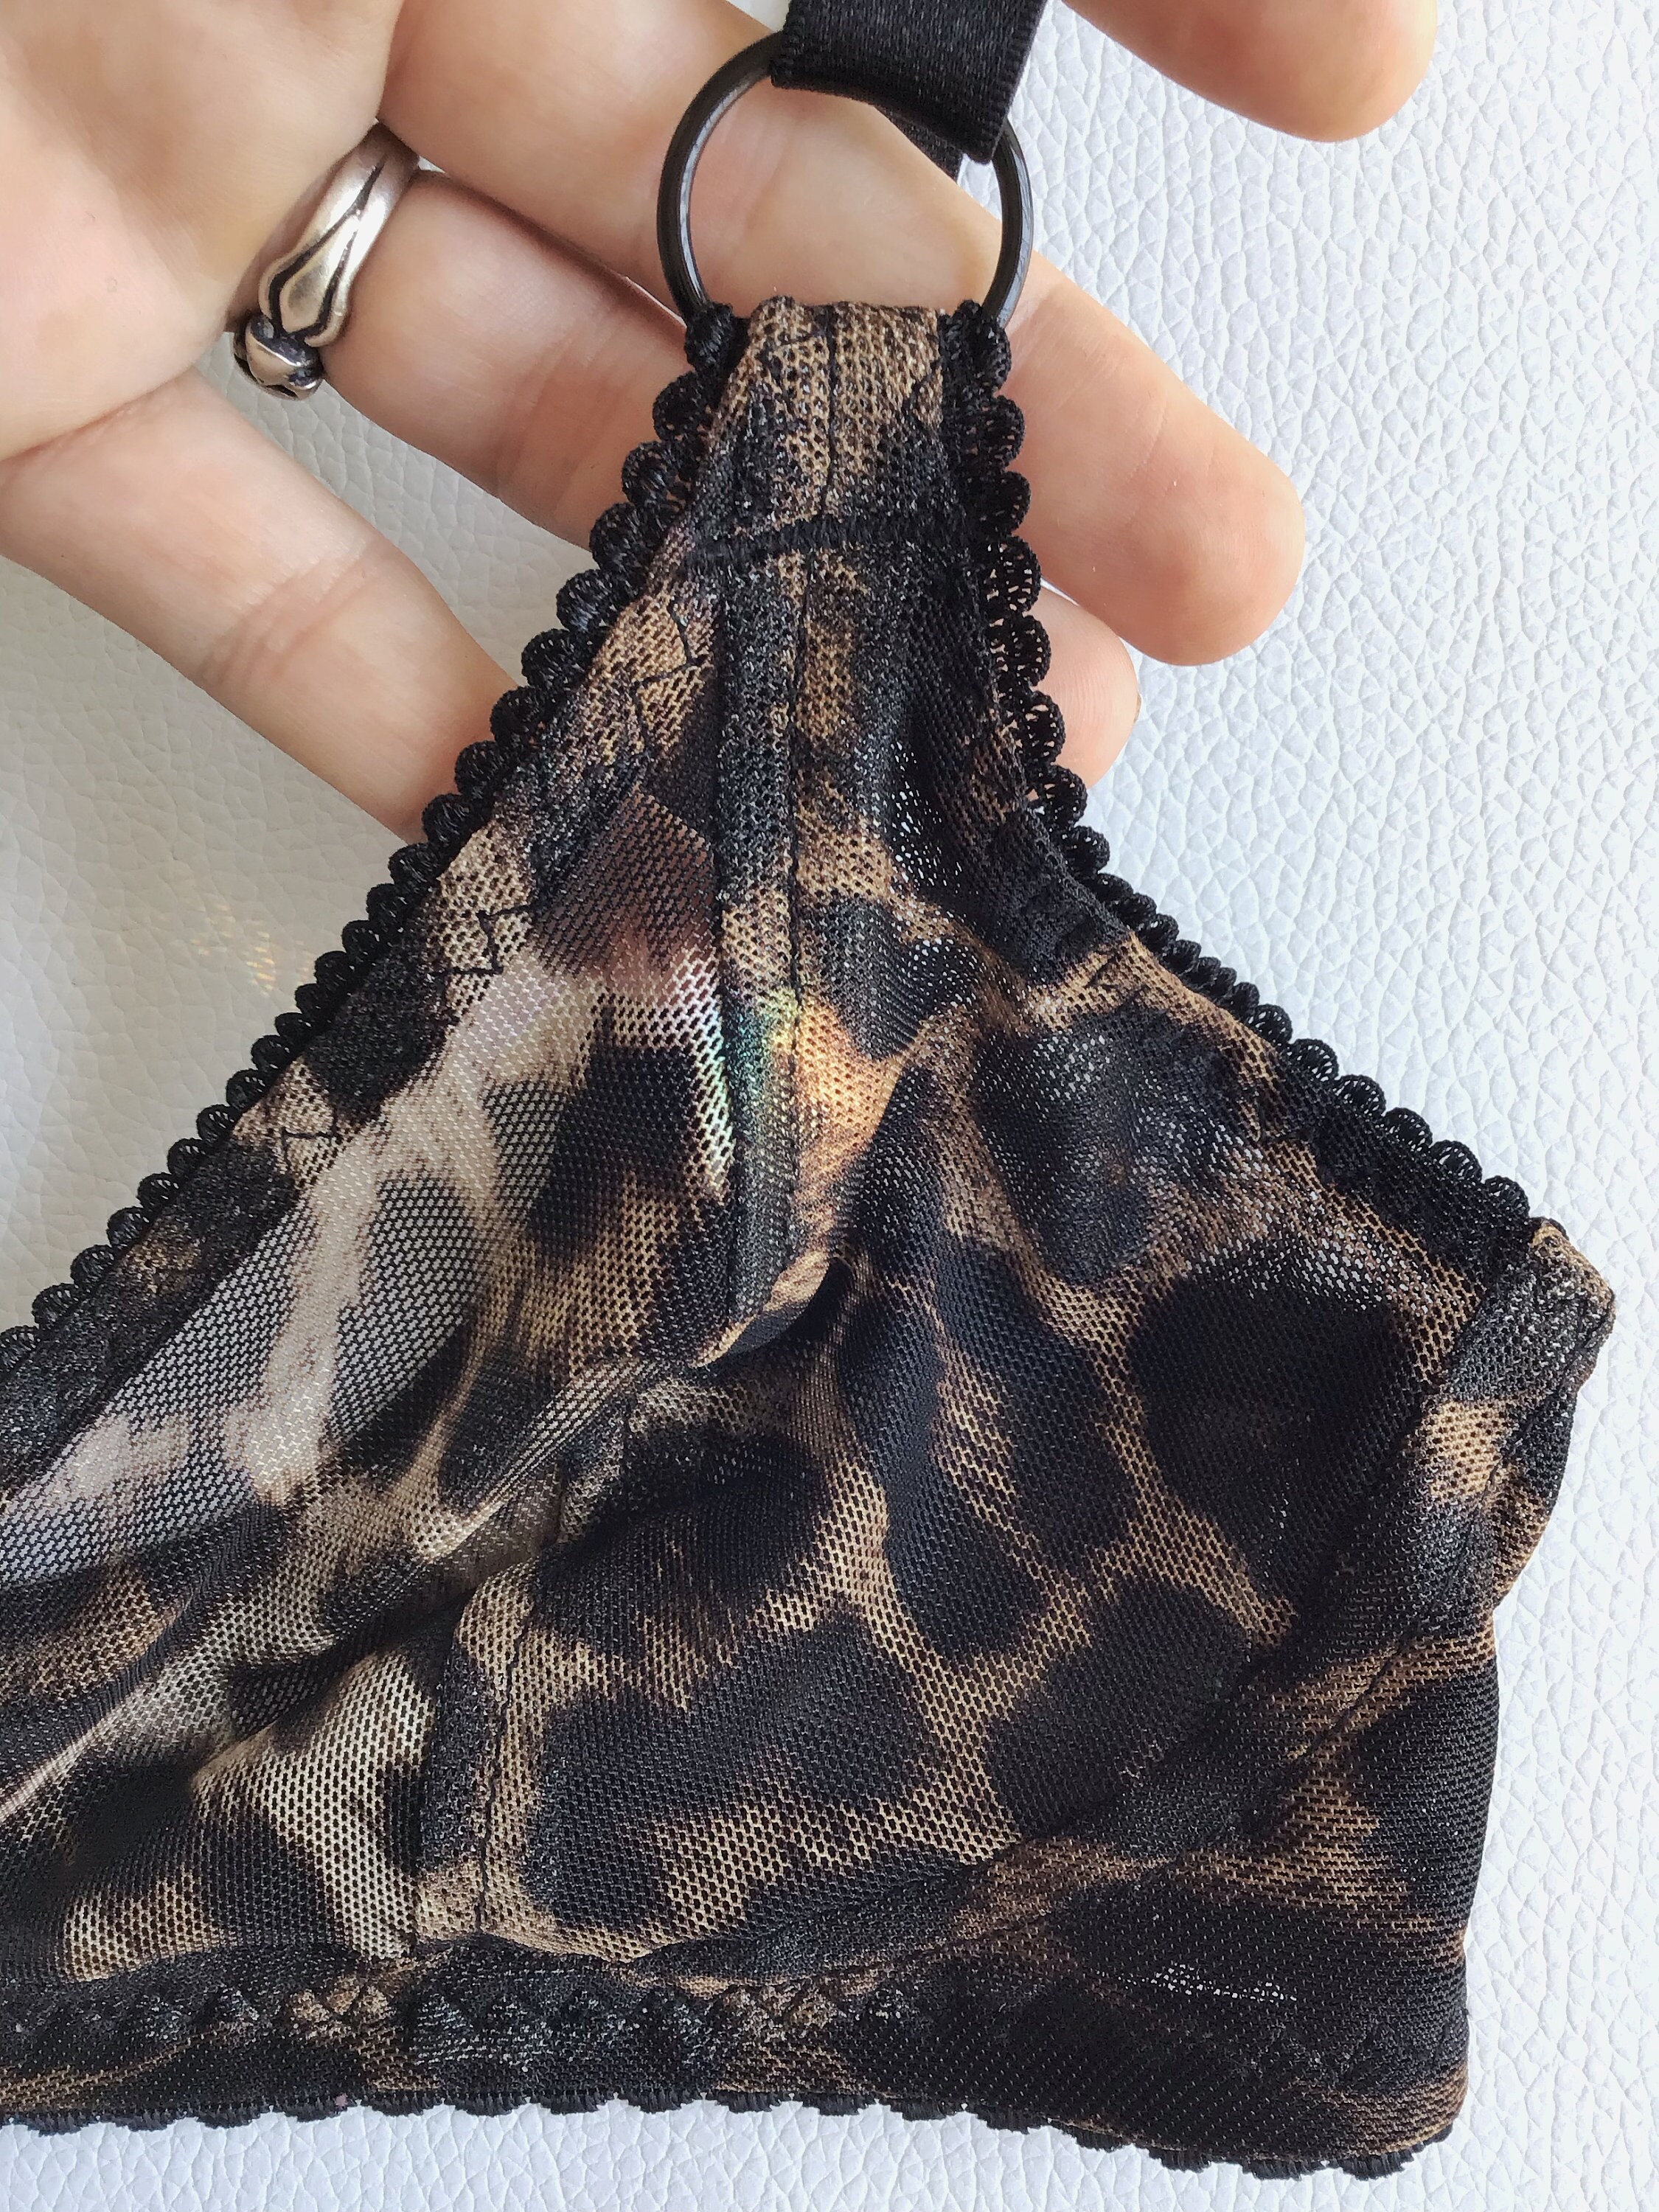 Leopard sheer TOUCH bra. Patterned see thru mesh, soft cup underwire free for comfort & natural shape. Handmade to order in your size. photo